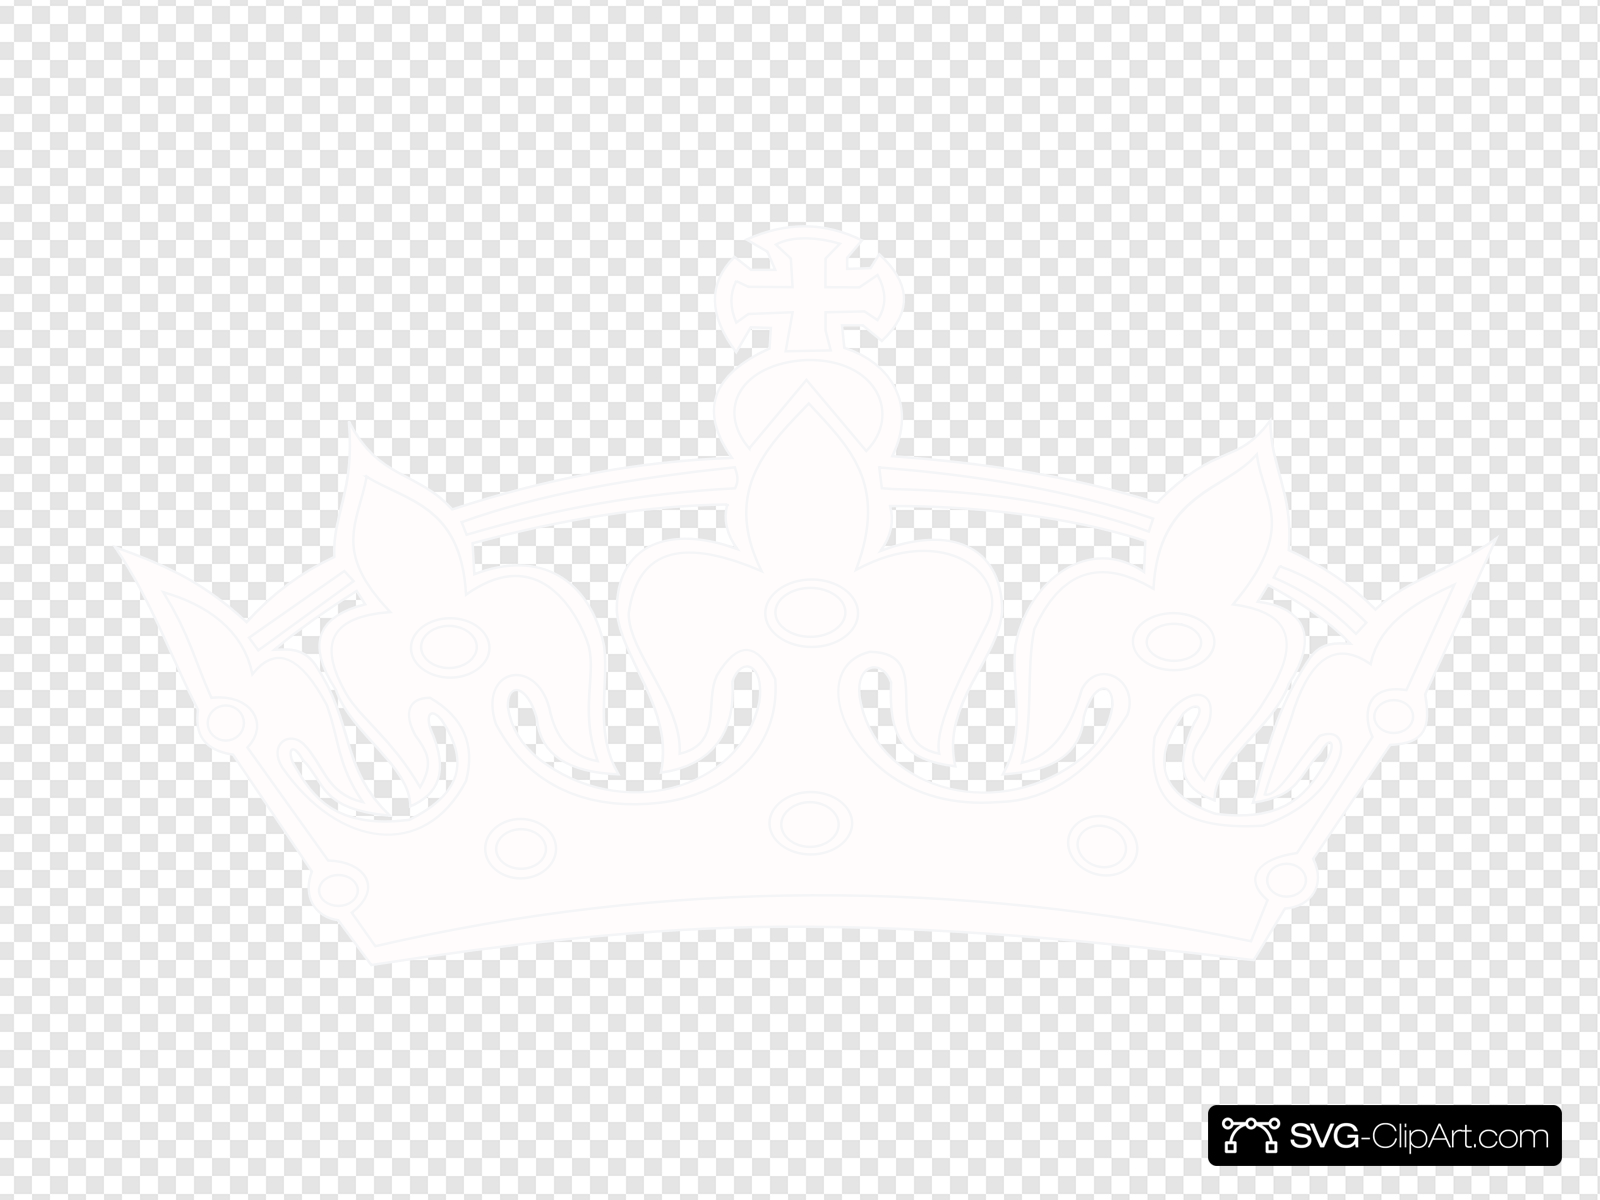 White Crown Clip art, Icon and SVG